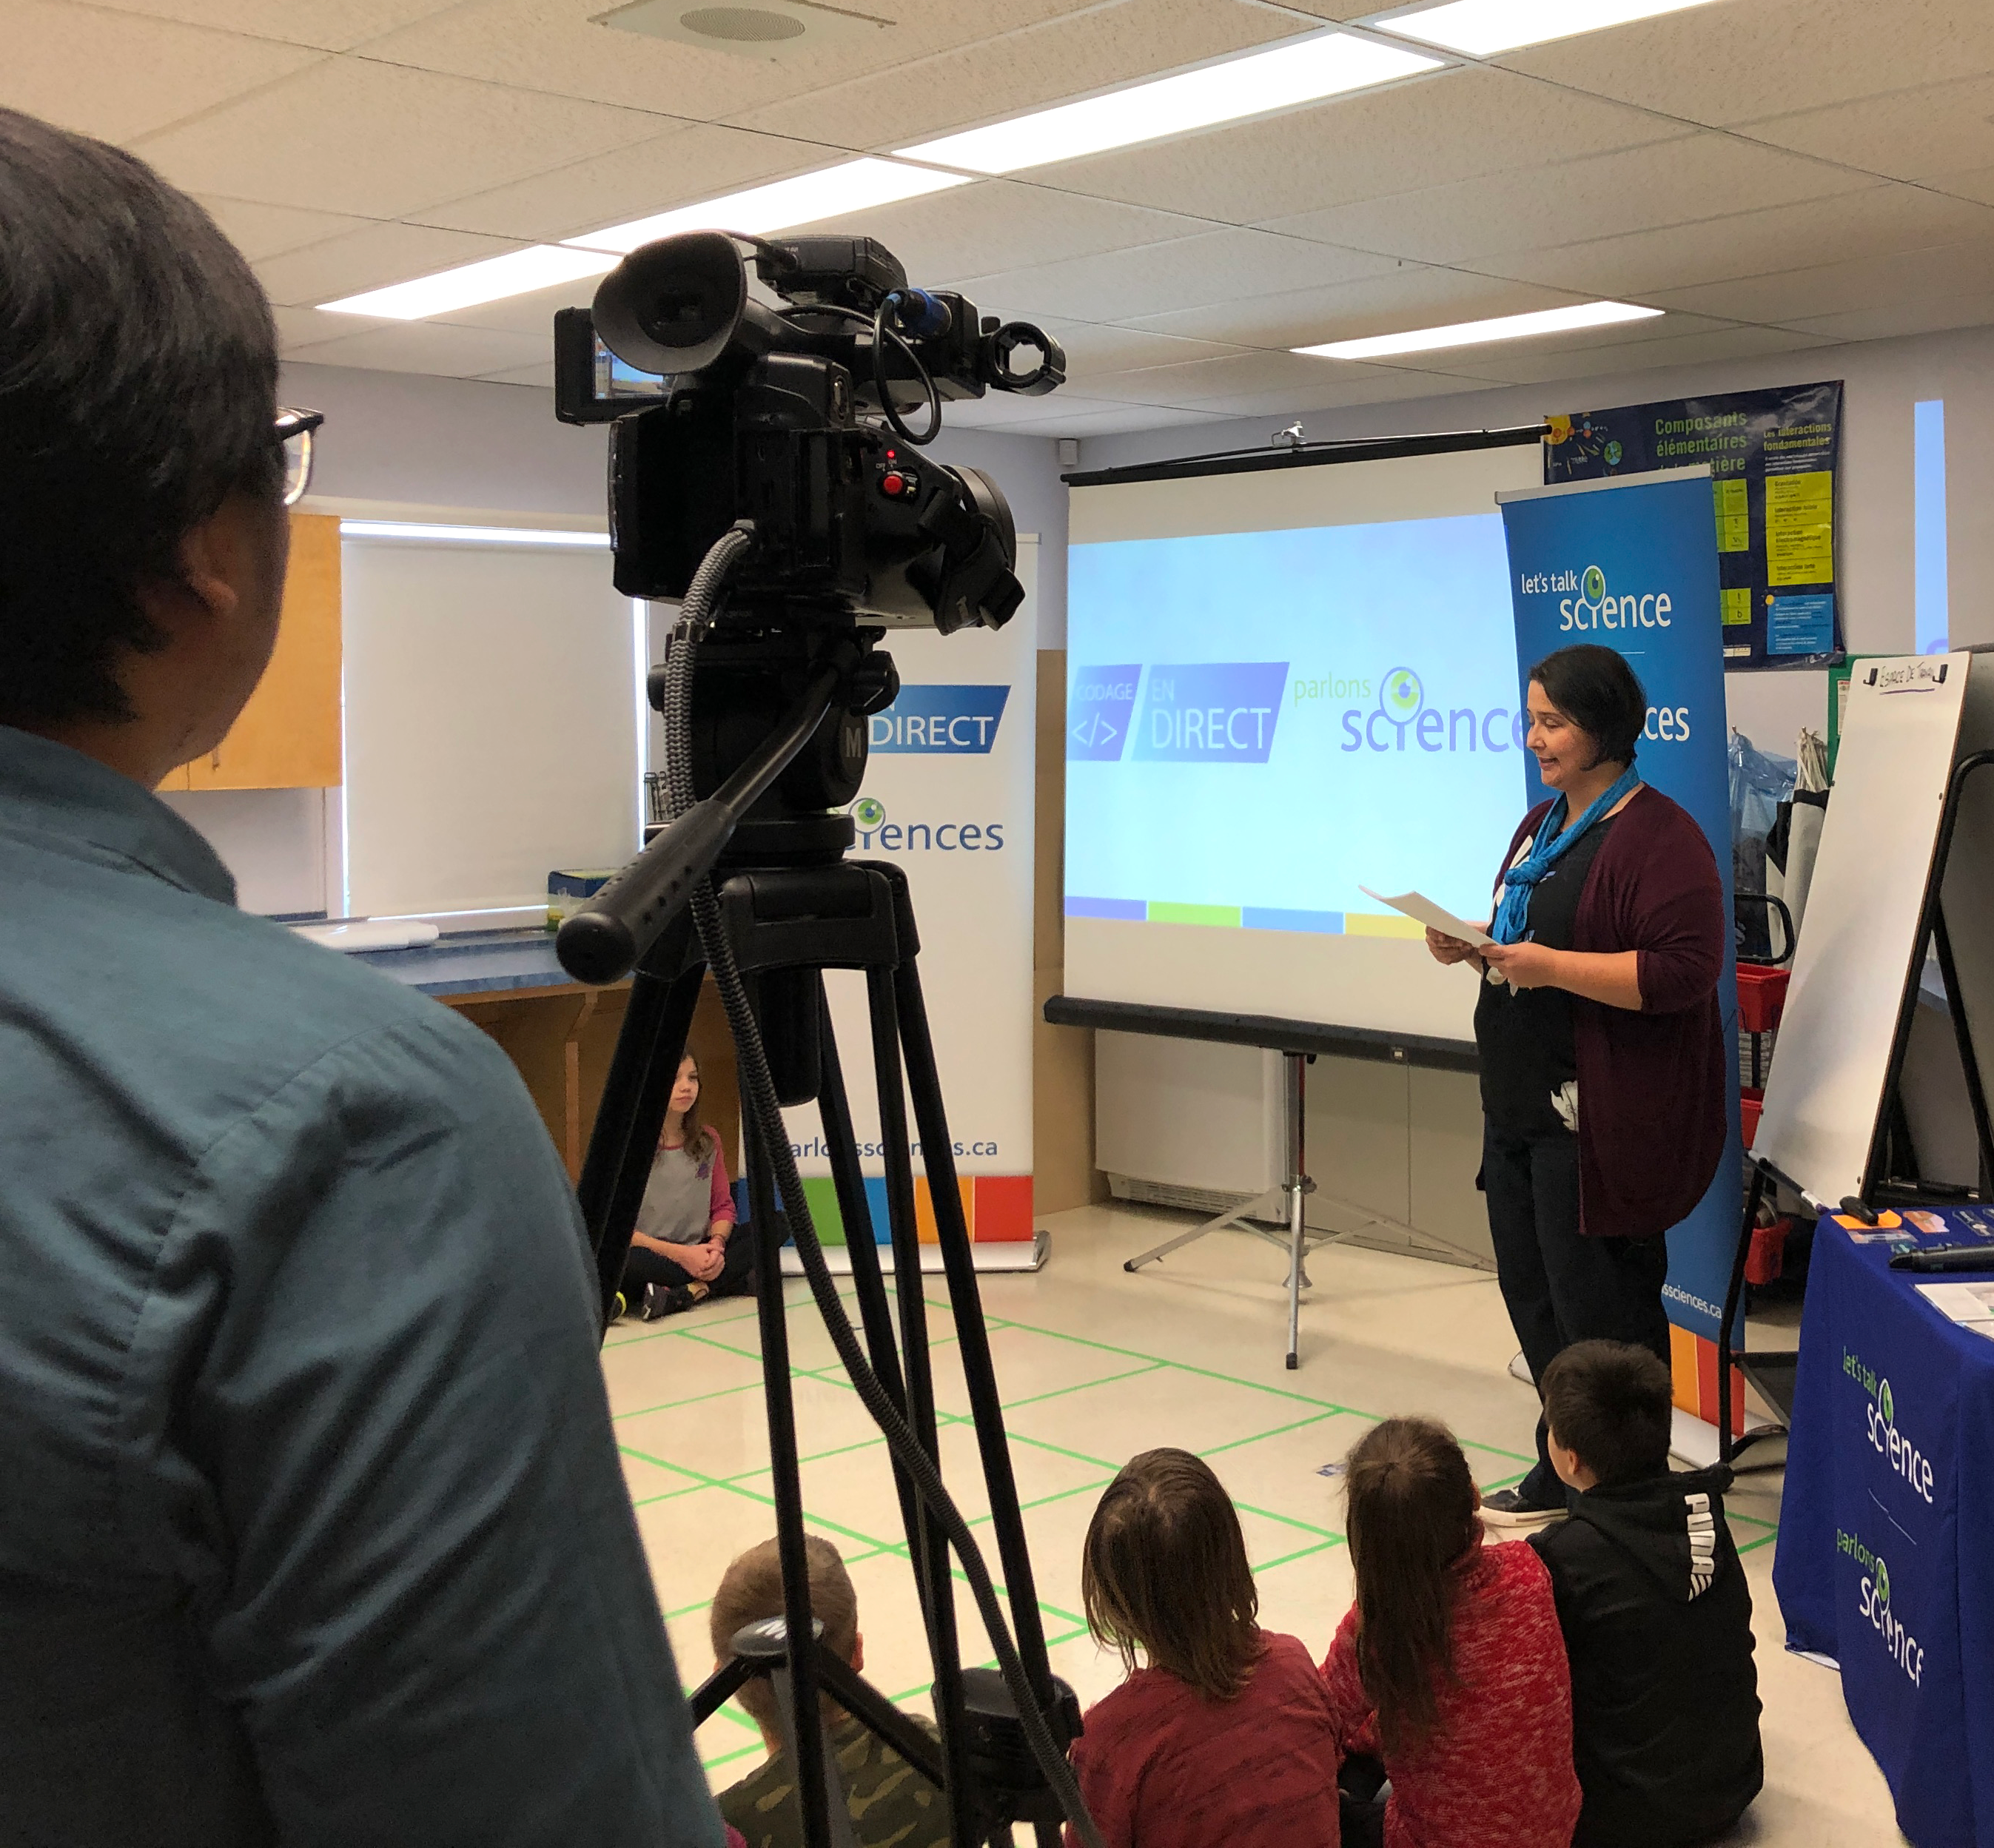 Stephanie Gaudet being filmed in her classroom during a Codage en direct professional learning broadcast